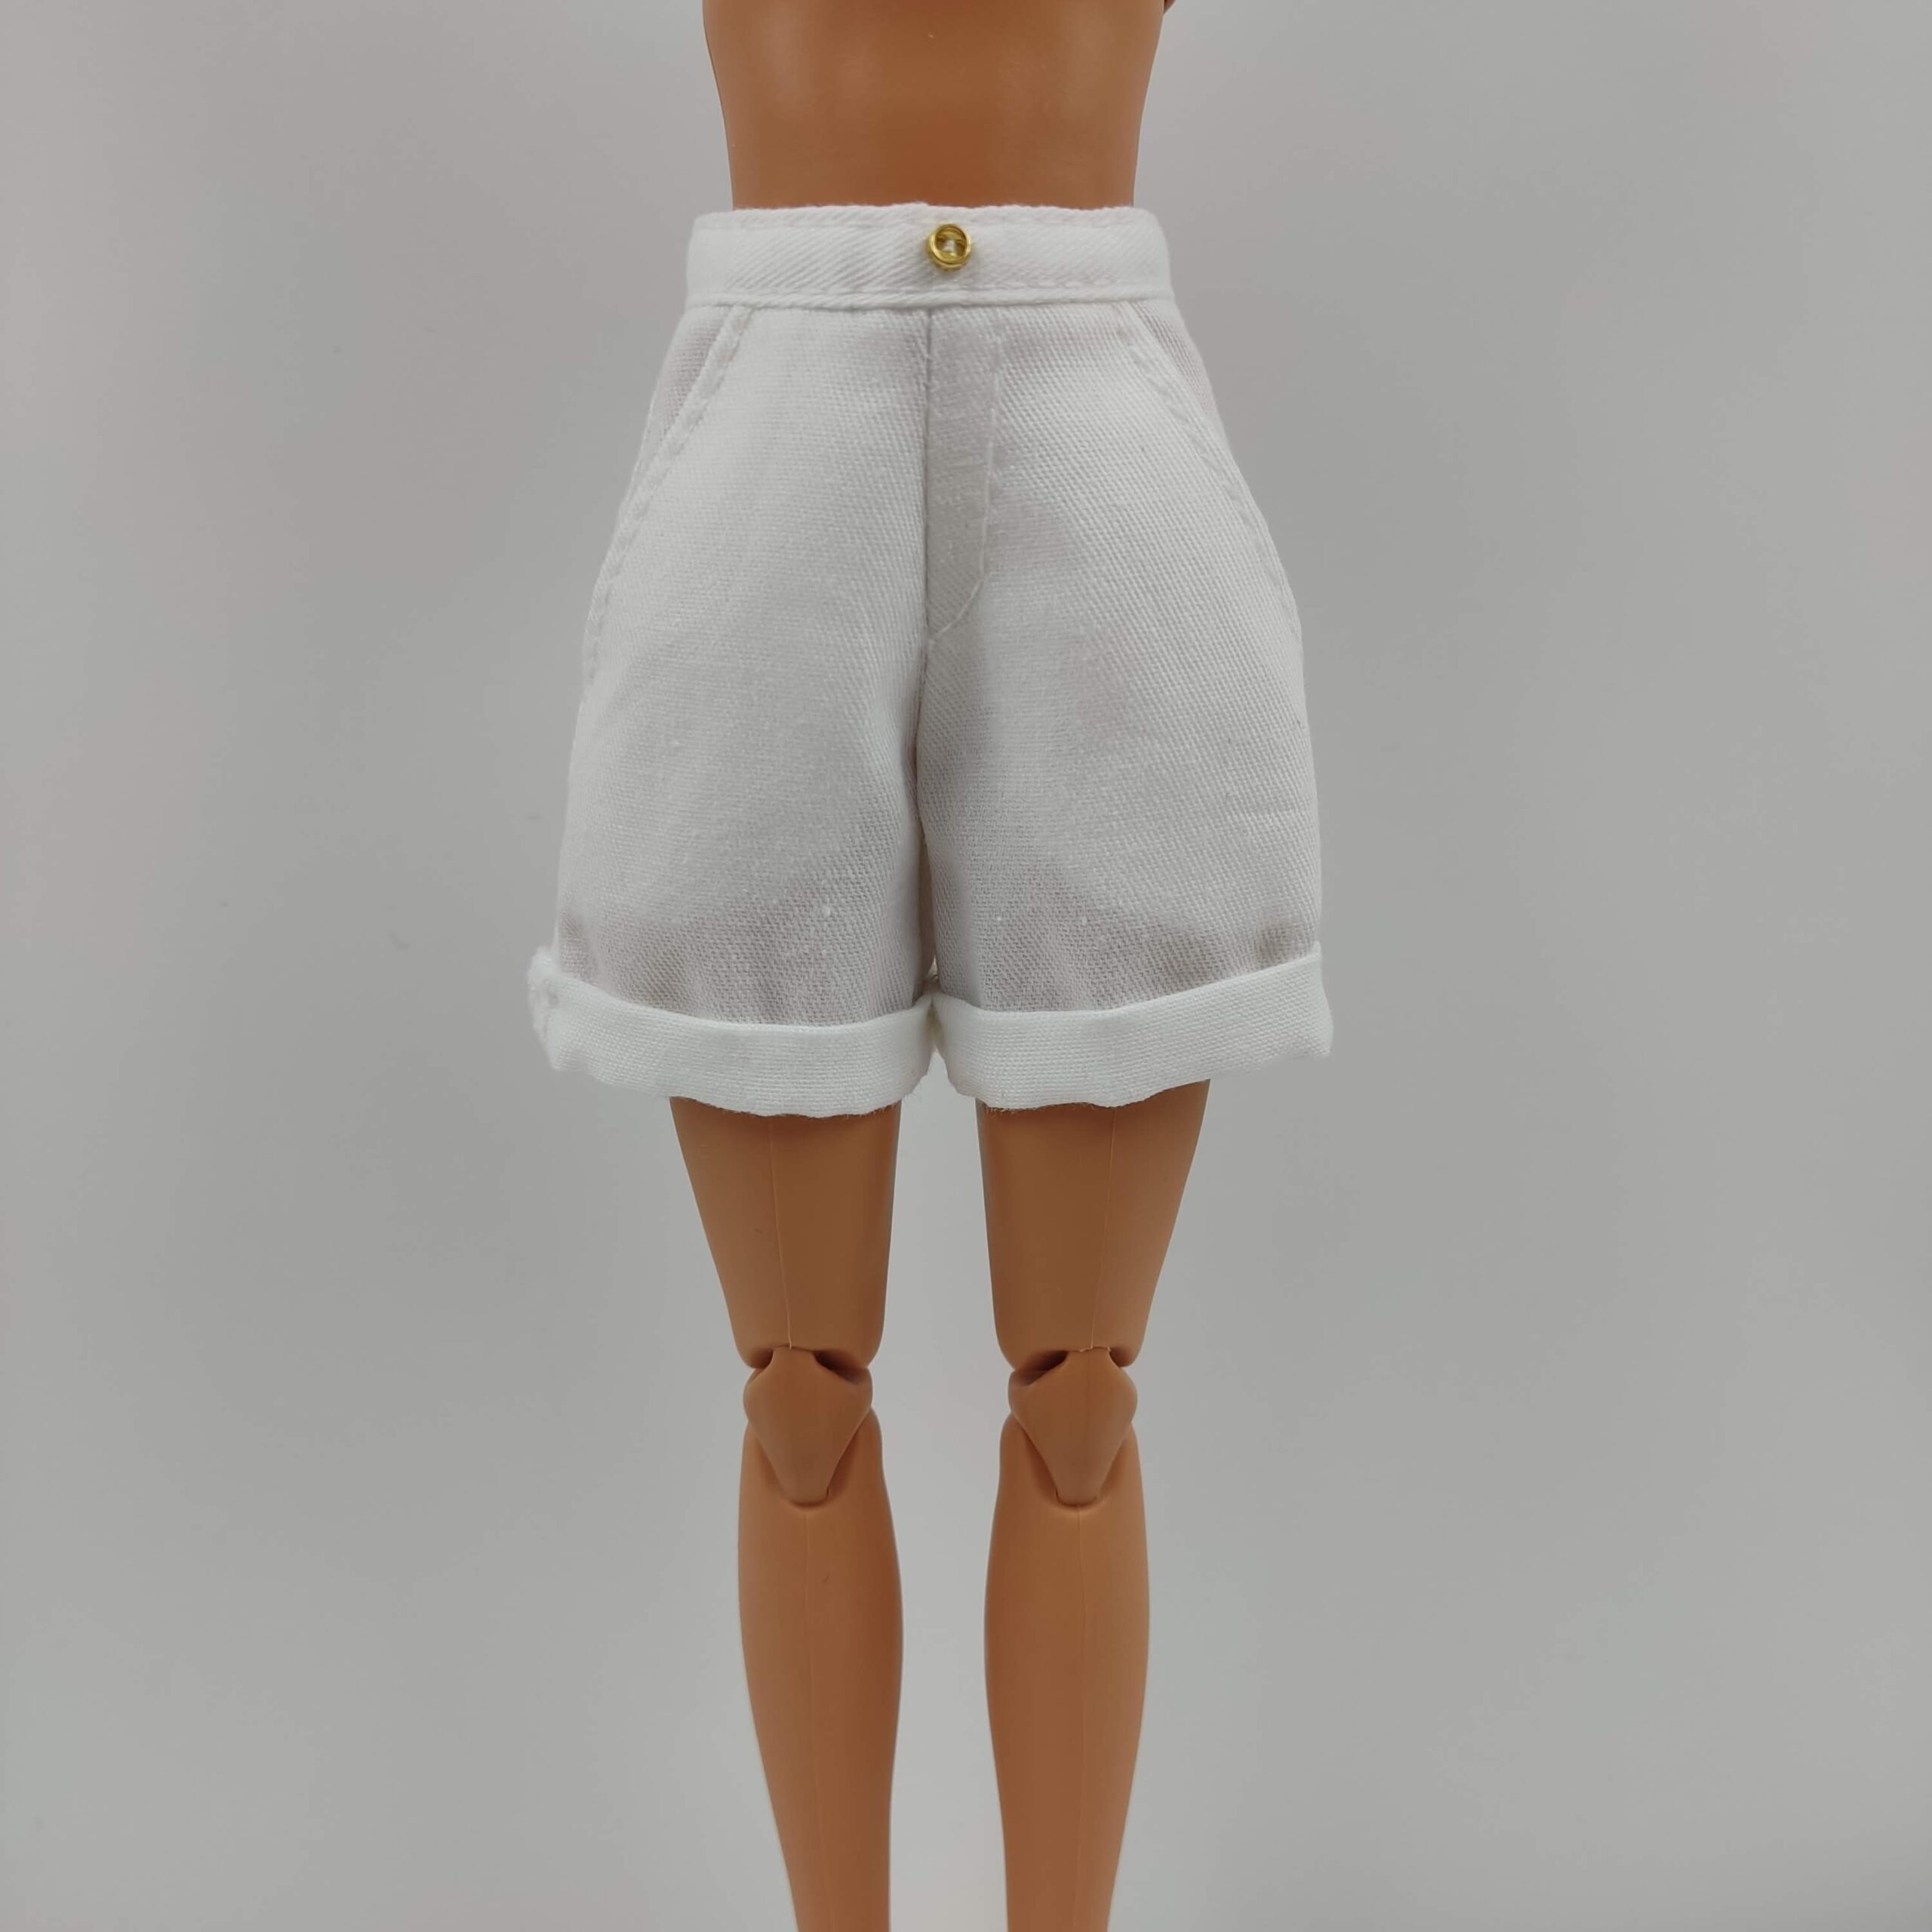 Barbie doll clothes white shorts - Inspire Uplift